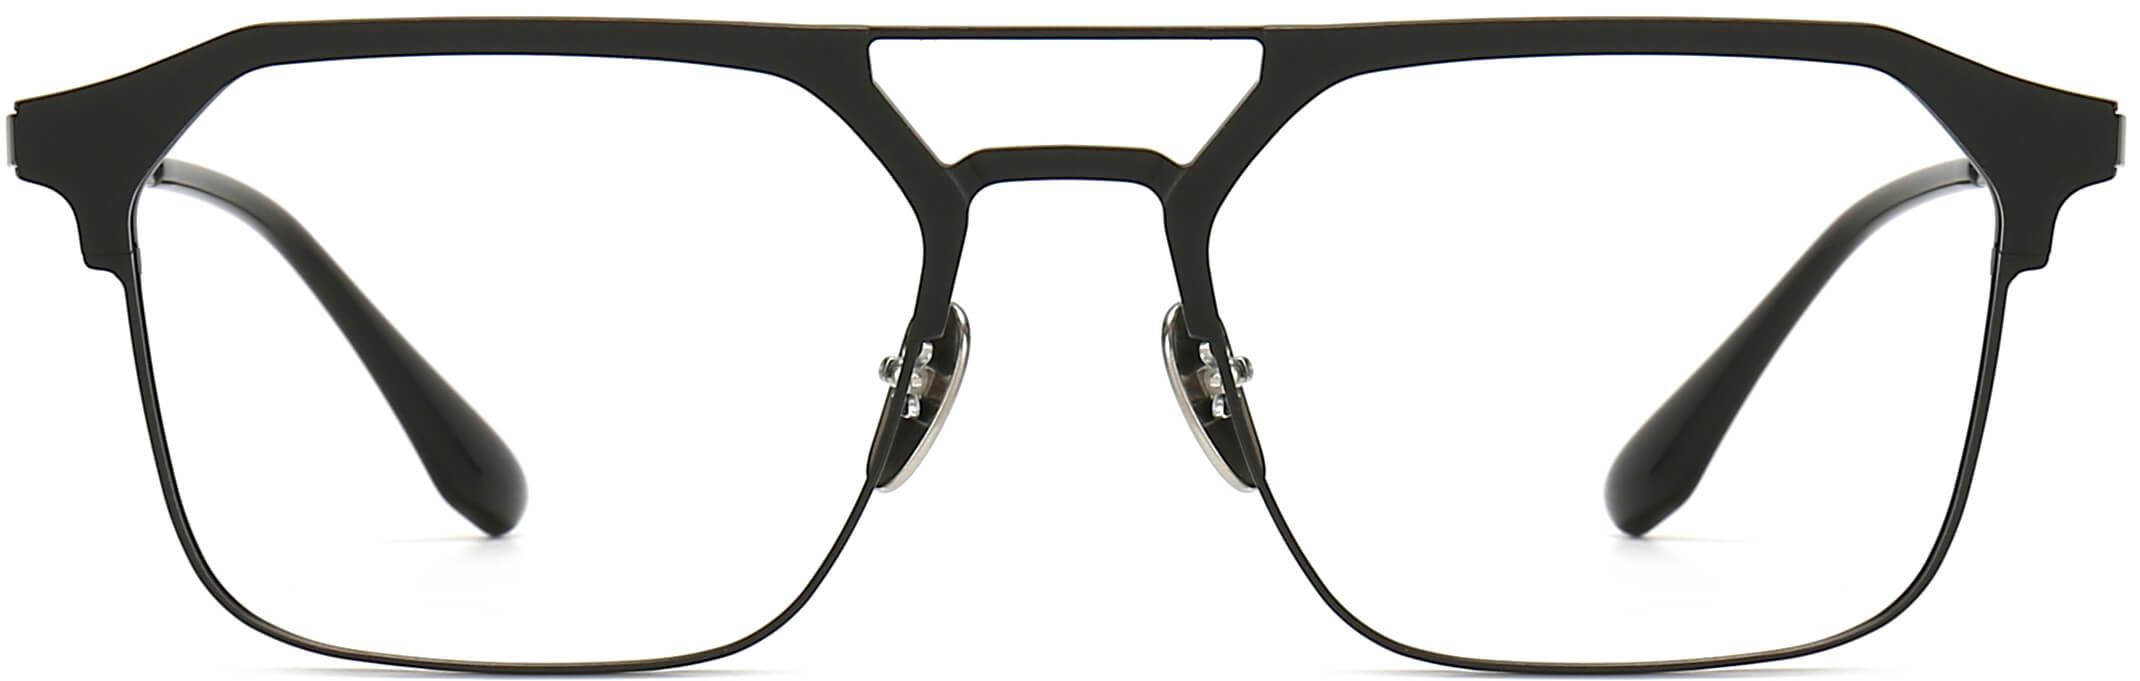 Orlando Square Black Eyeglasses from ANRRI, front view